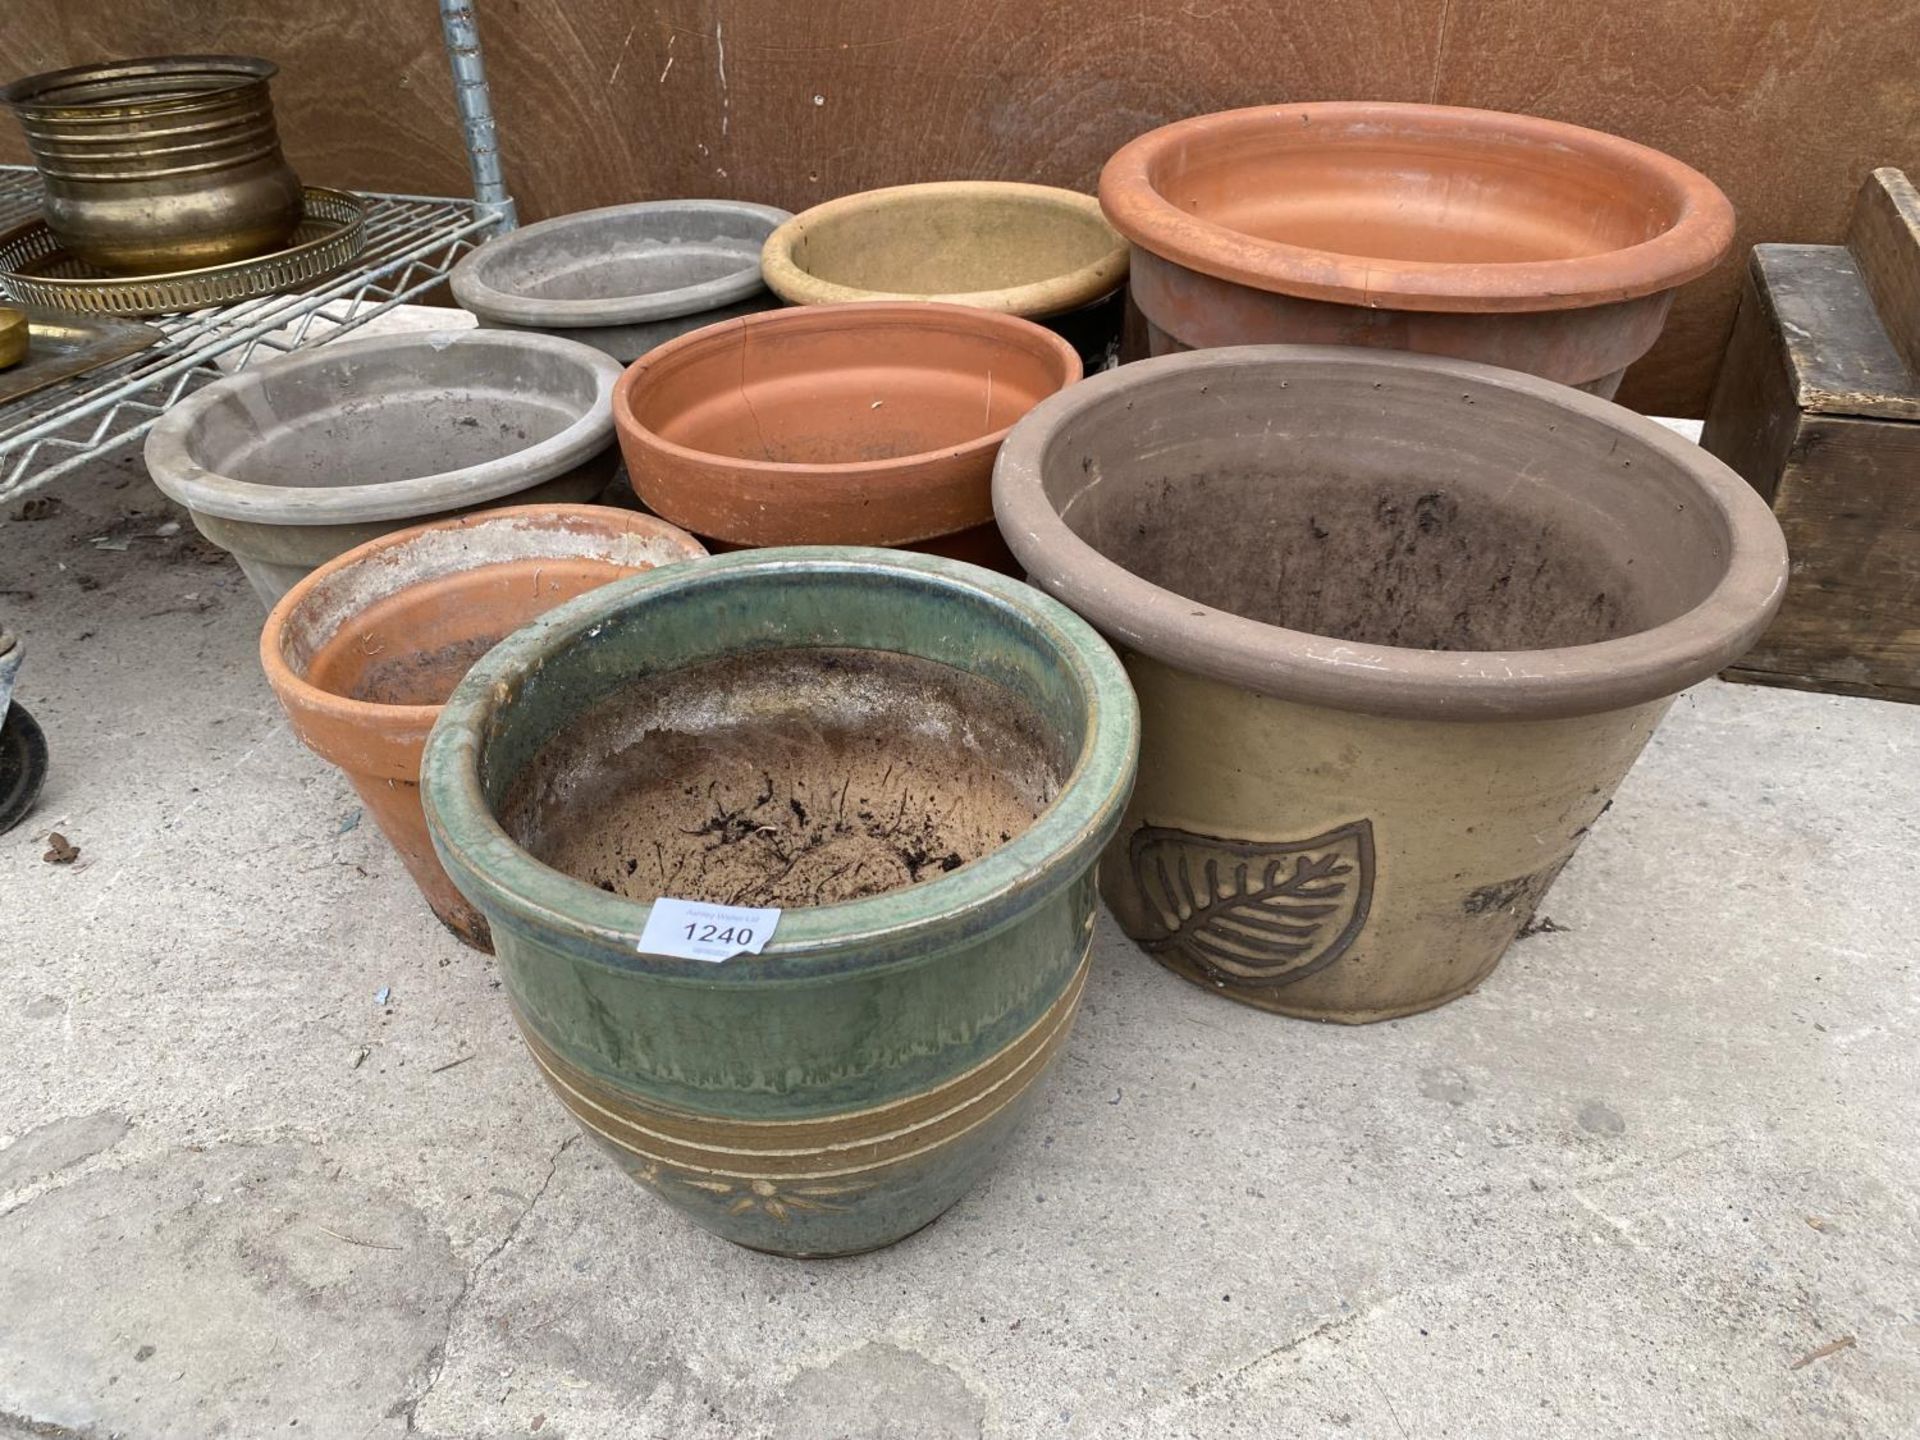 A LARGE ASSORTMENT OF TERACOTTA AND GLAZED GARDEN POTS